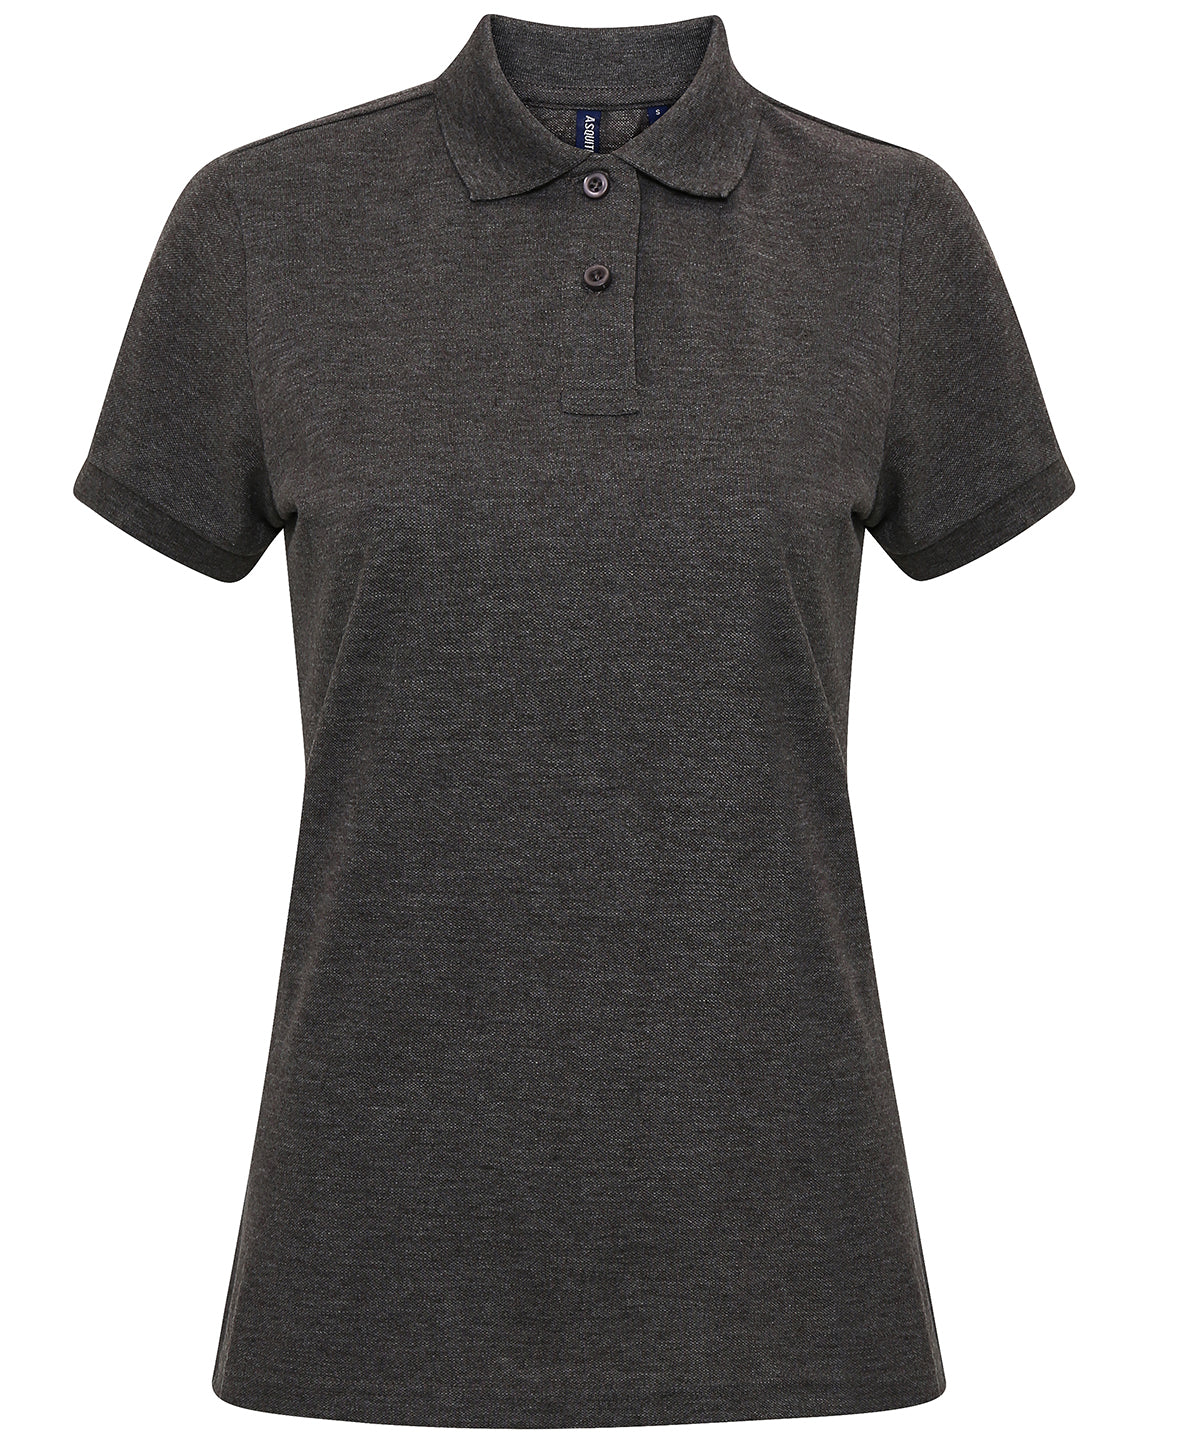 Personalised Polo Shirts - Black Asquith & Fox Women’s polycotton blend polo